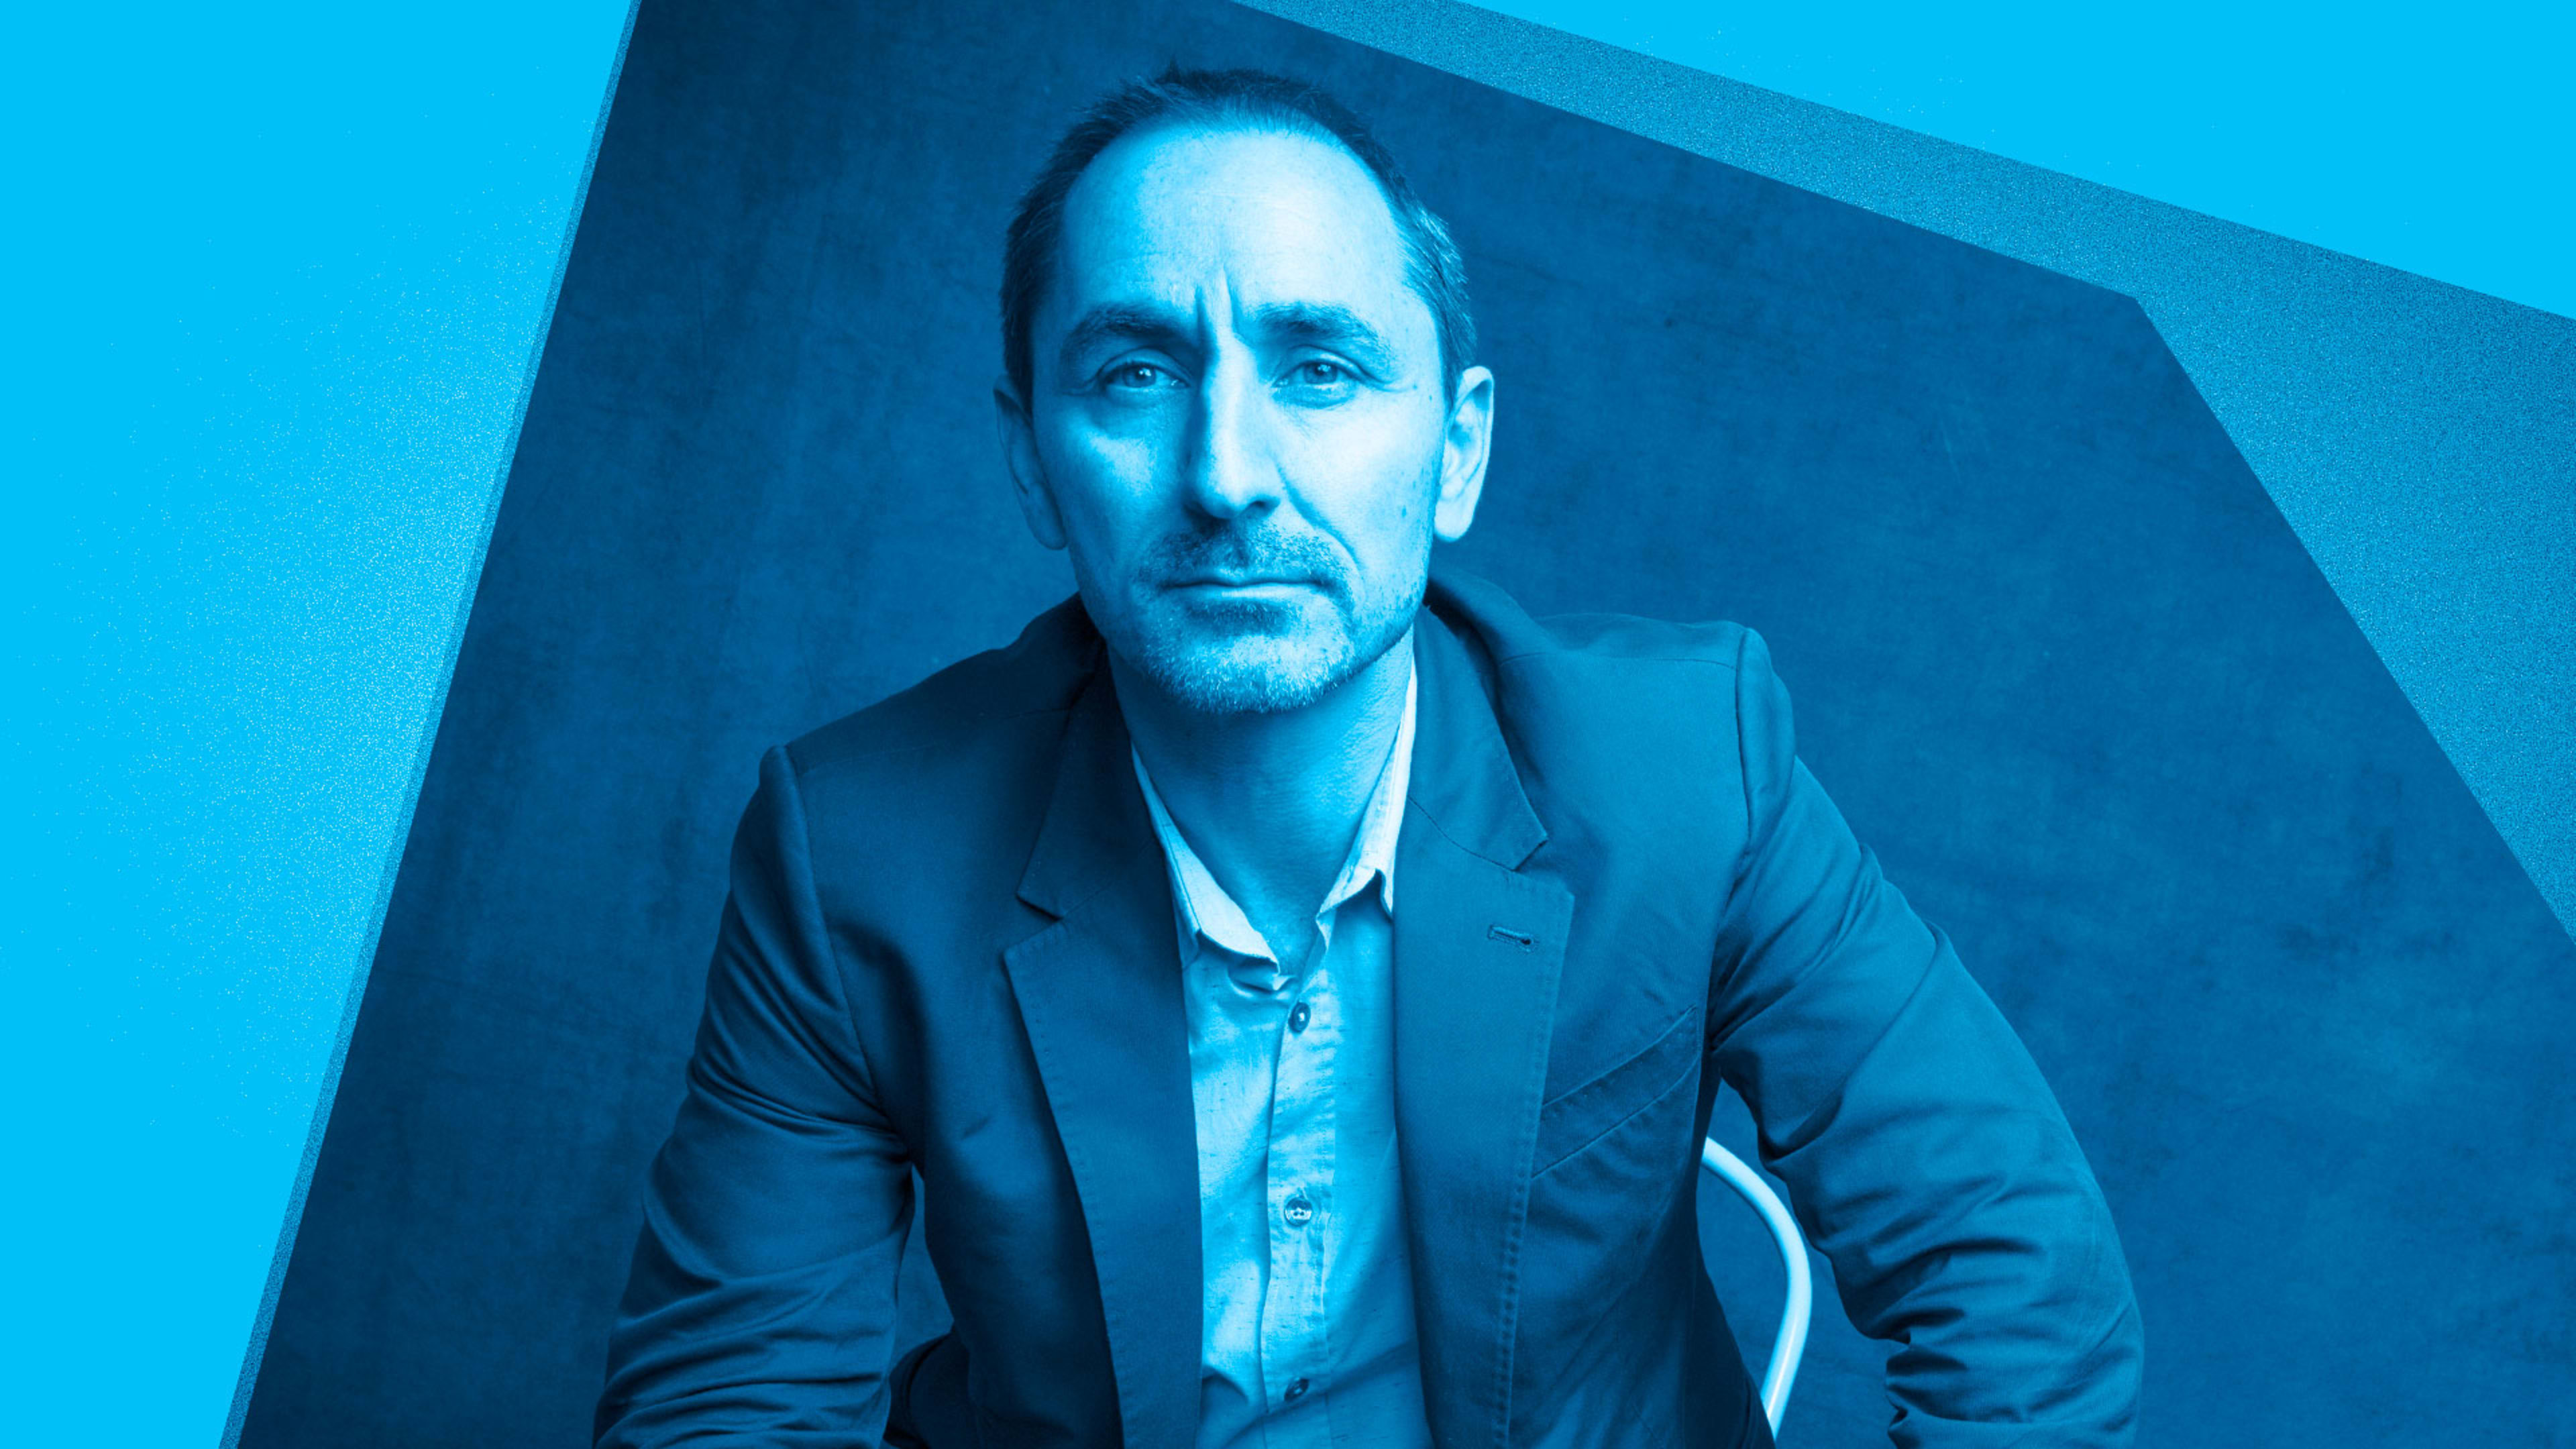 David Droga changed advertising. Now he wants to kill it.